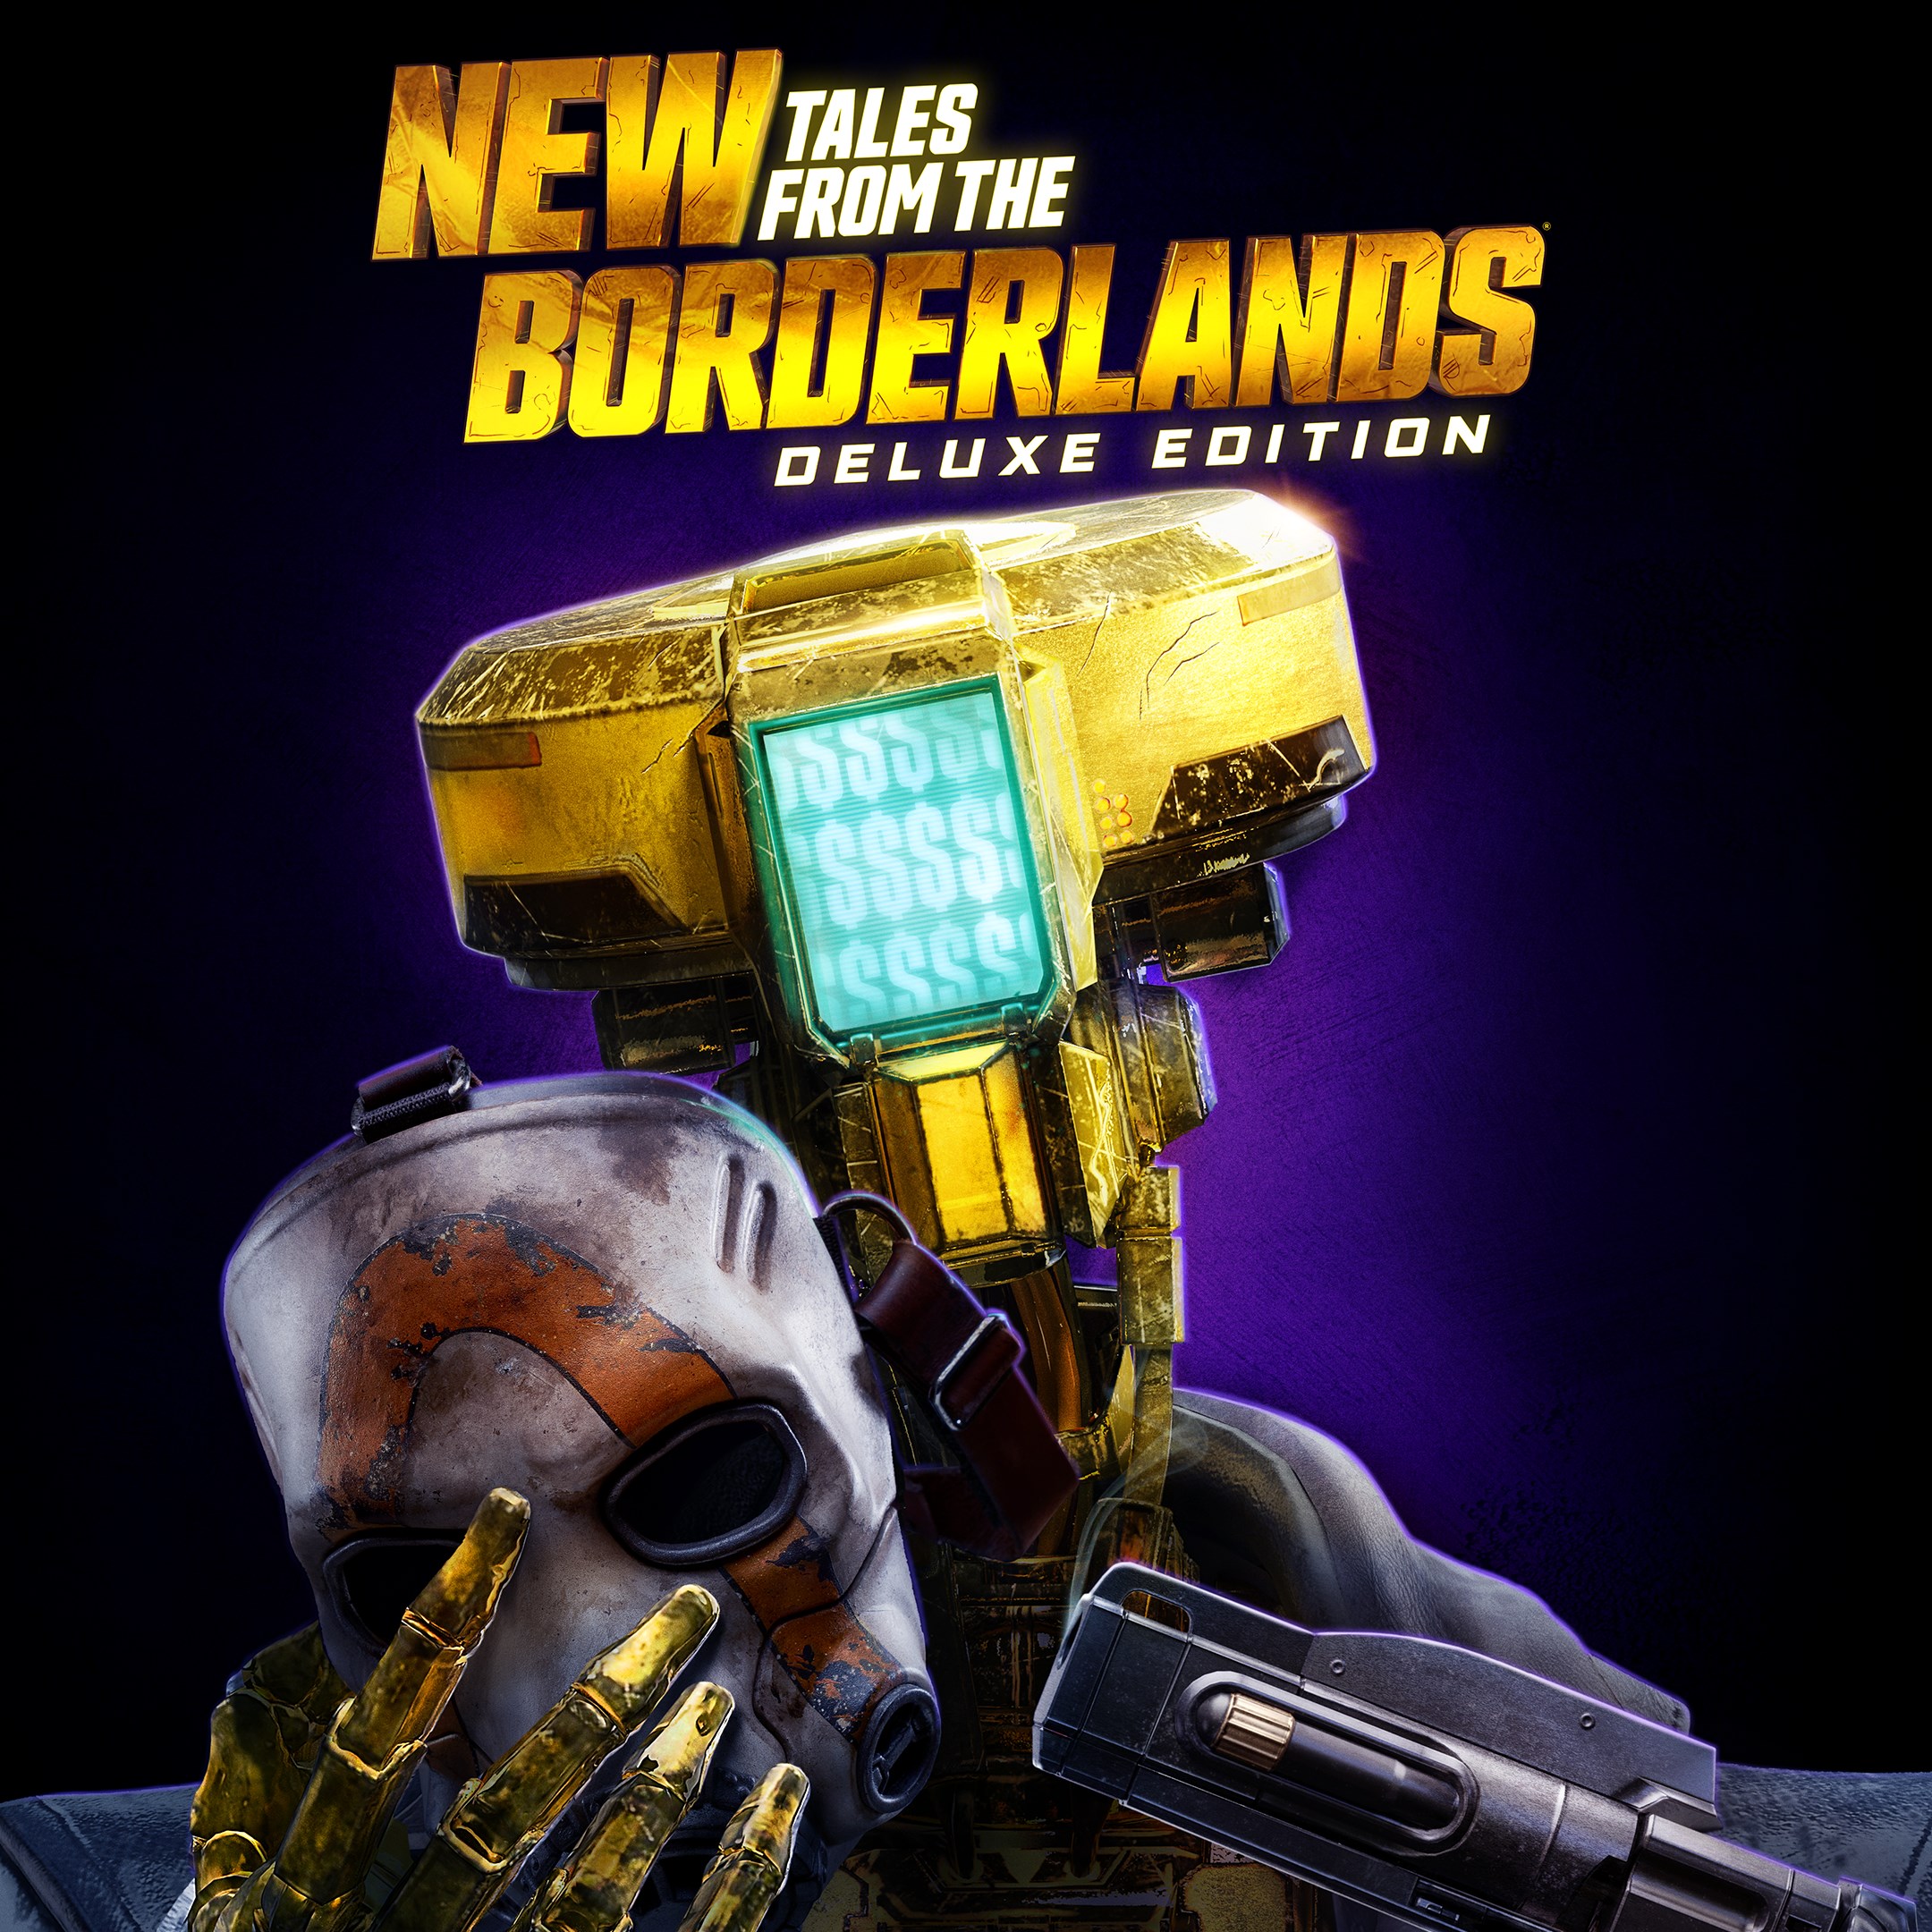 New Tales from the Borderlands – Deluxe Edition